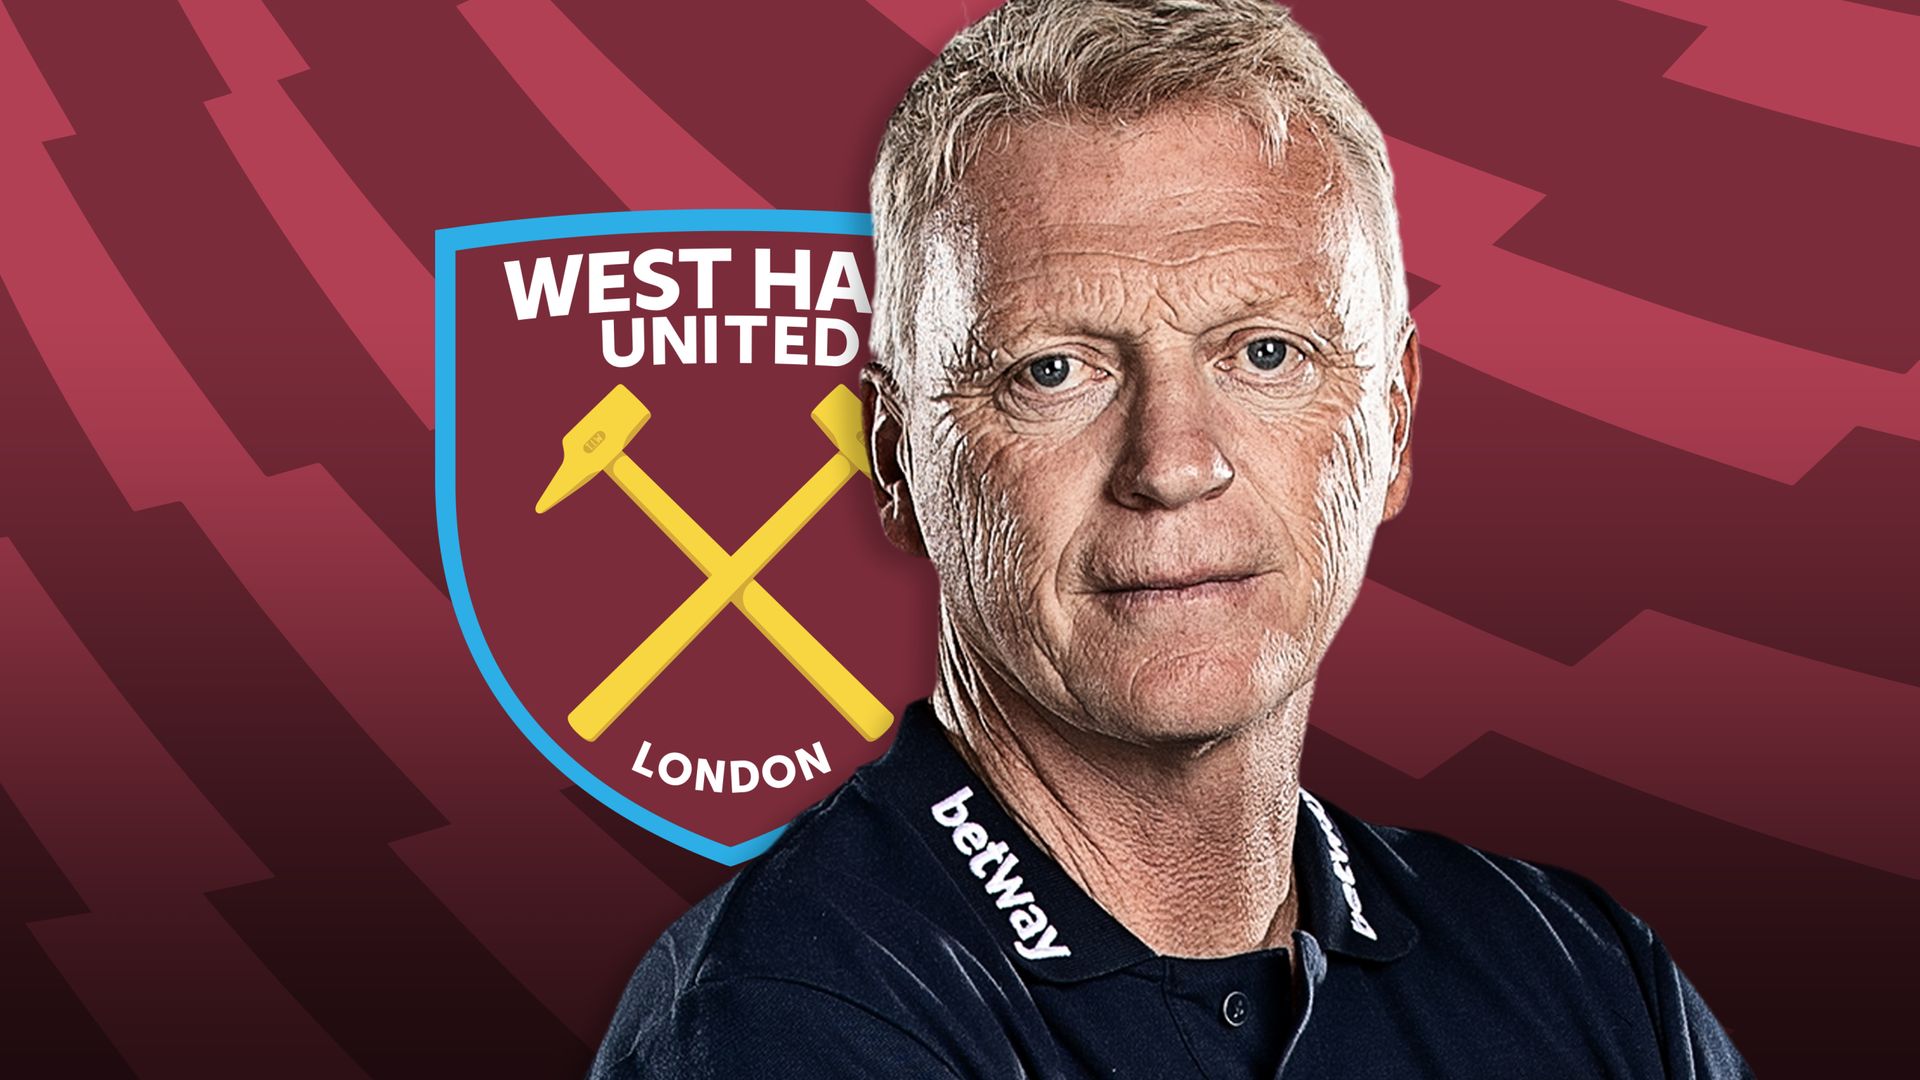 West Ham want Moyes to stay on as manager next season